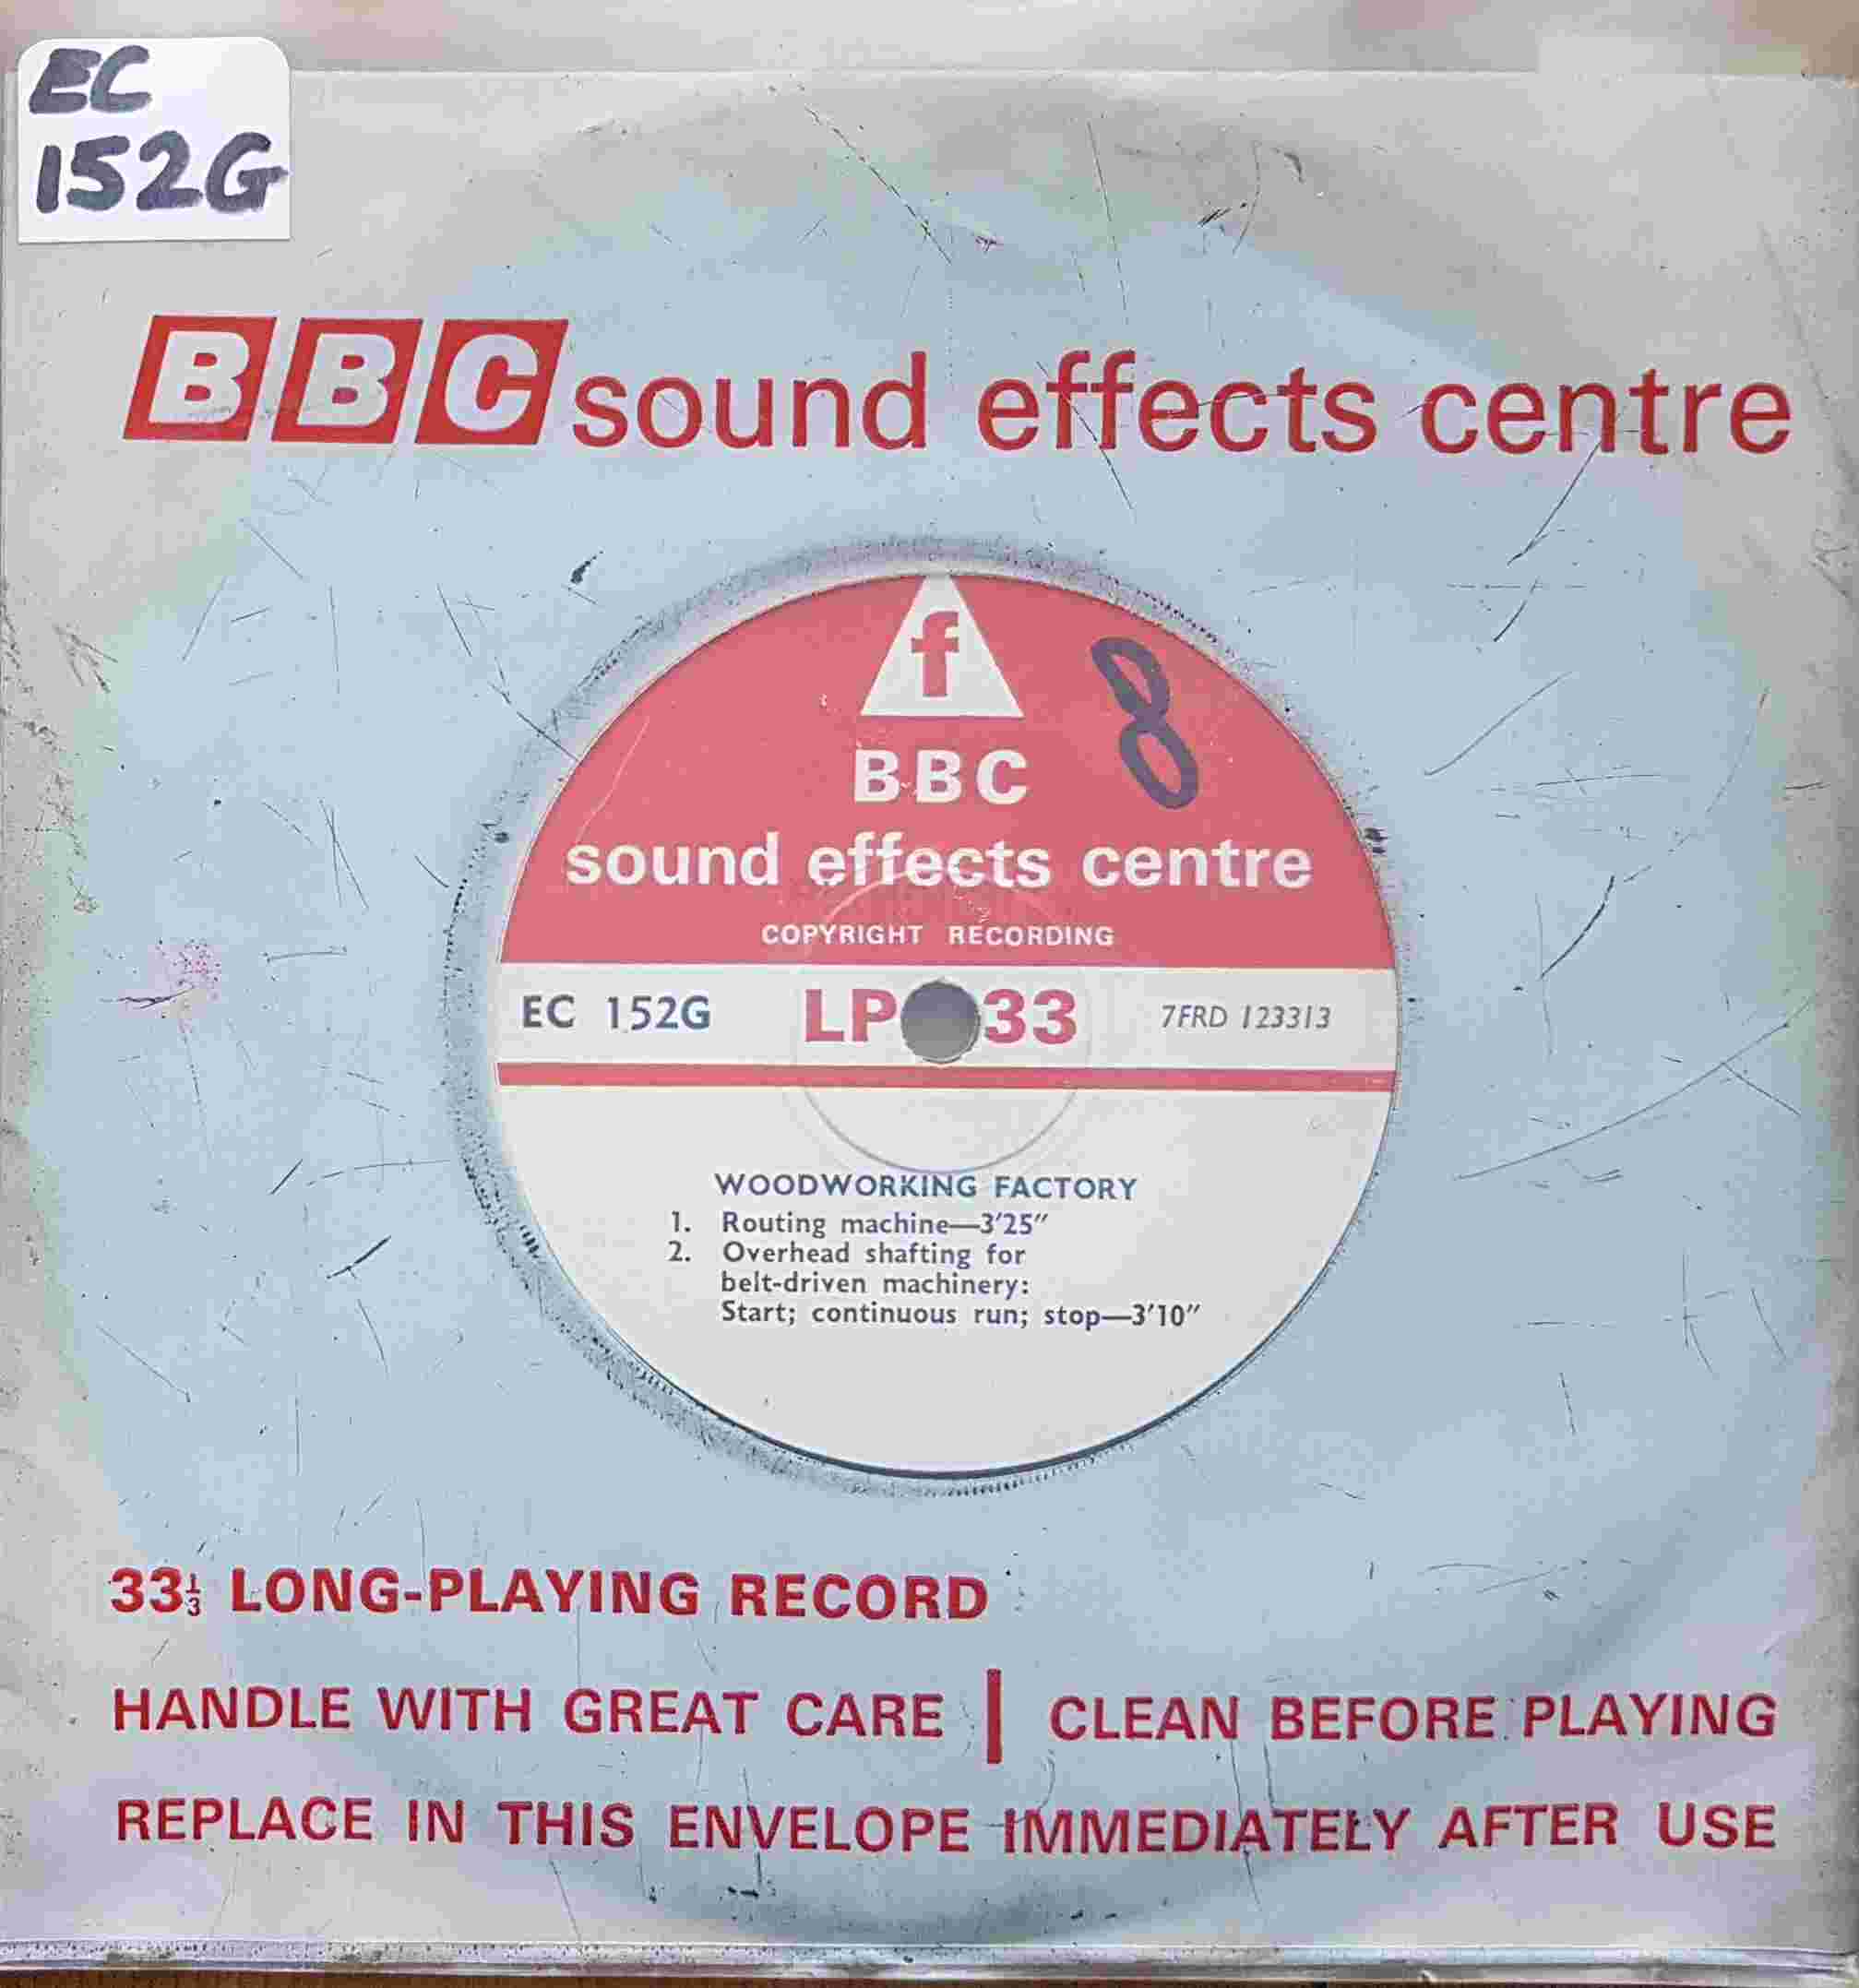 Picture of EC 152G Woodworking factory by artist Not registered from the BBC singles - Records and Tapes library